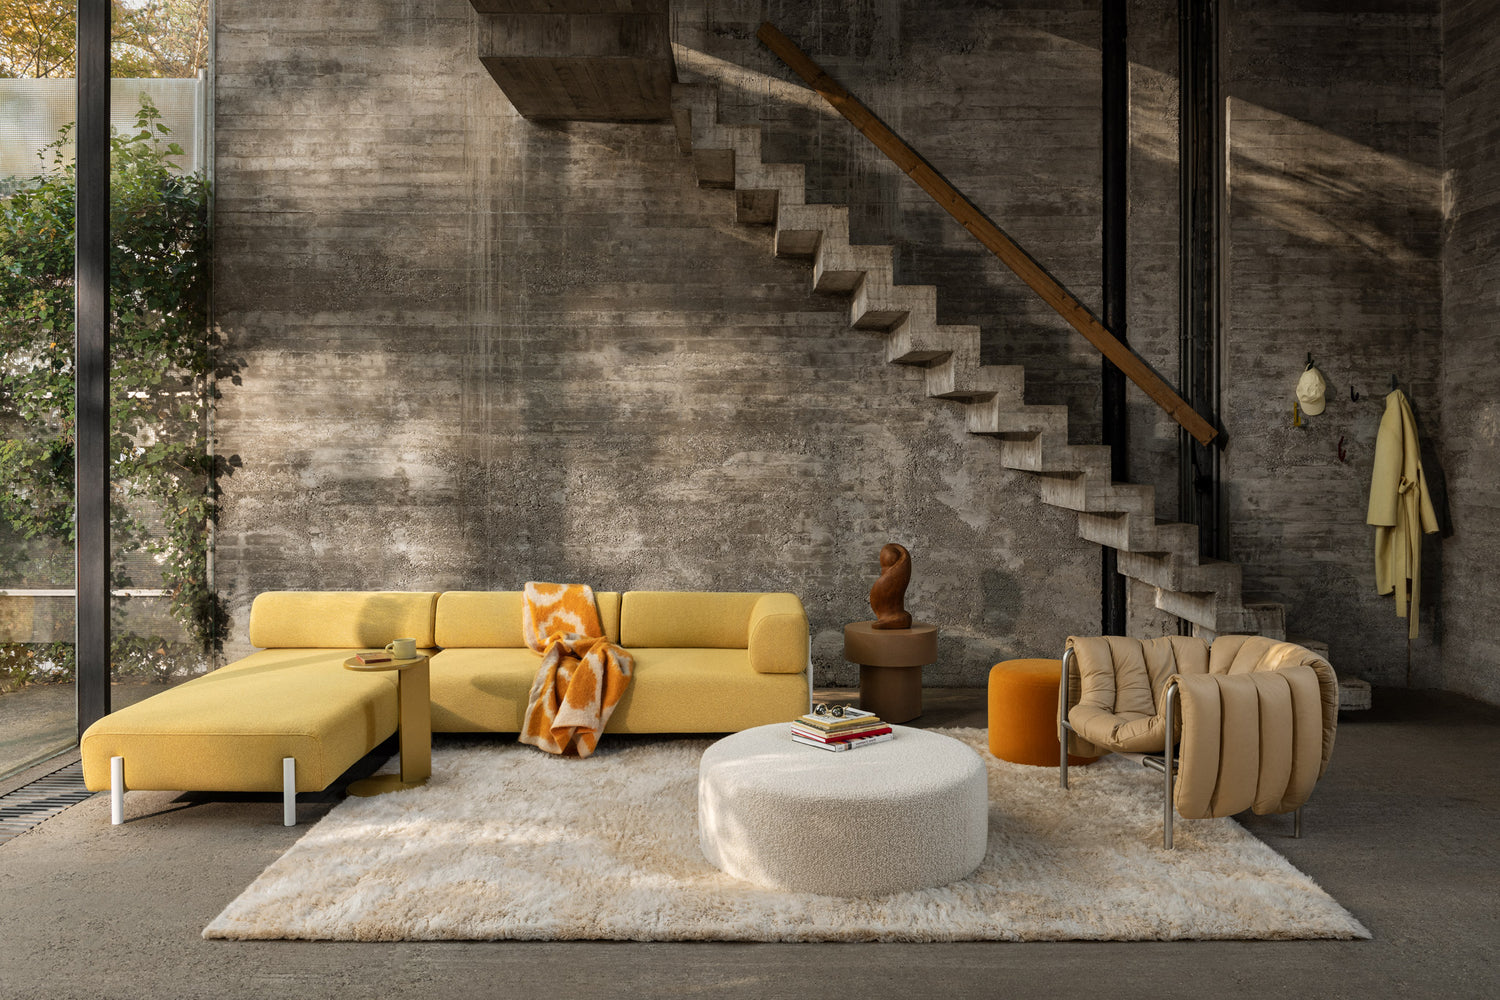 A living room scene featuring Palo Modular Corner Sofa Left Sunflower, Lolly Side Table Ochre Yellow, Monster Throw Ochre / Off-White Ring, Bon Pouf Round Large Eggshell, Stump Side Table Natural, Monster Rug Beige / Off-White, Puffy Lounge Chair Sand